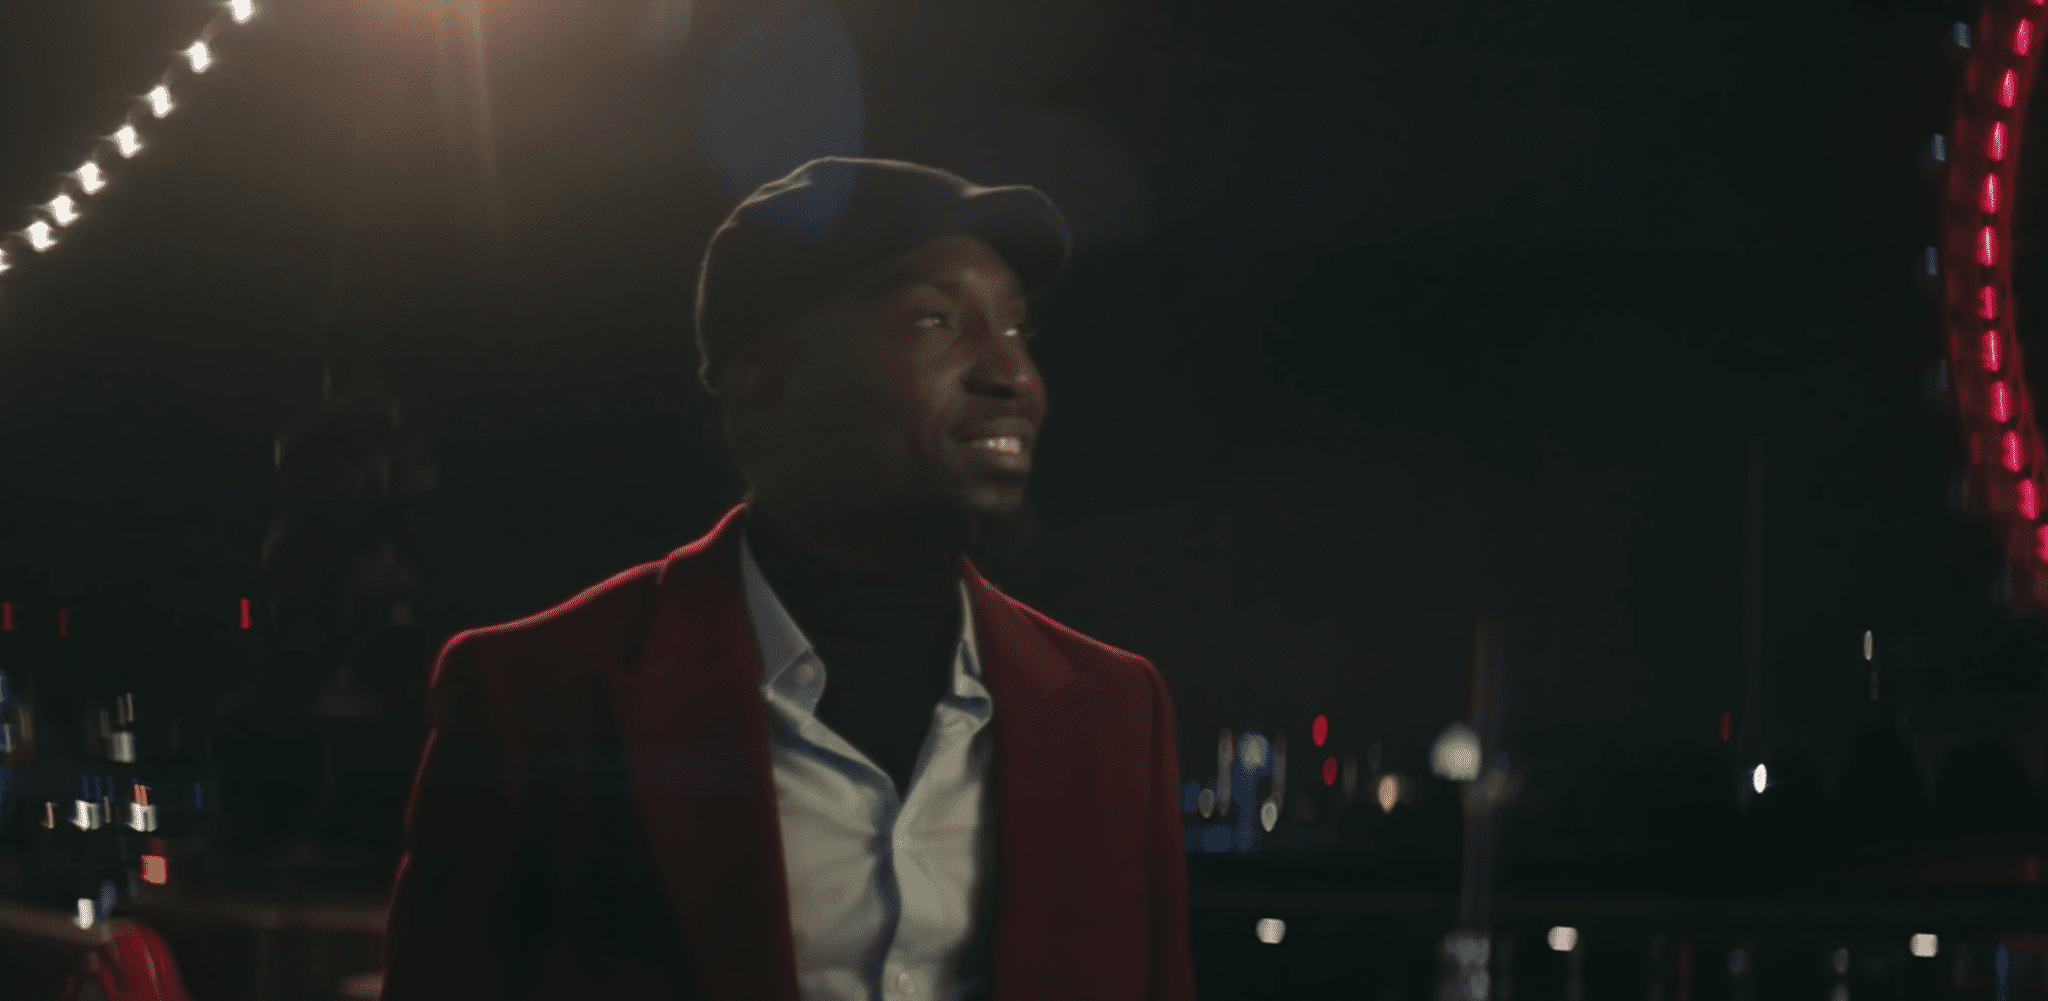 Watch Timi Dakolo & Emeli Sande In The Cheerful Video For ‘Merry Christmas, Darling”